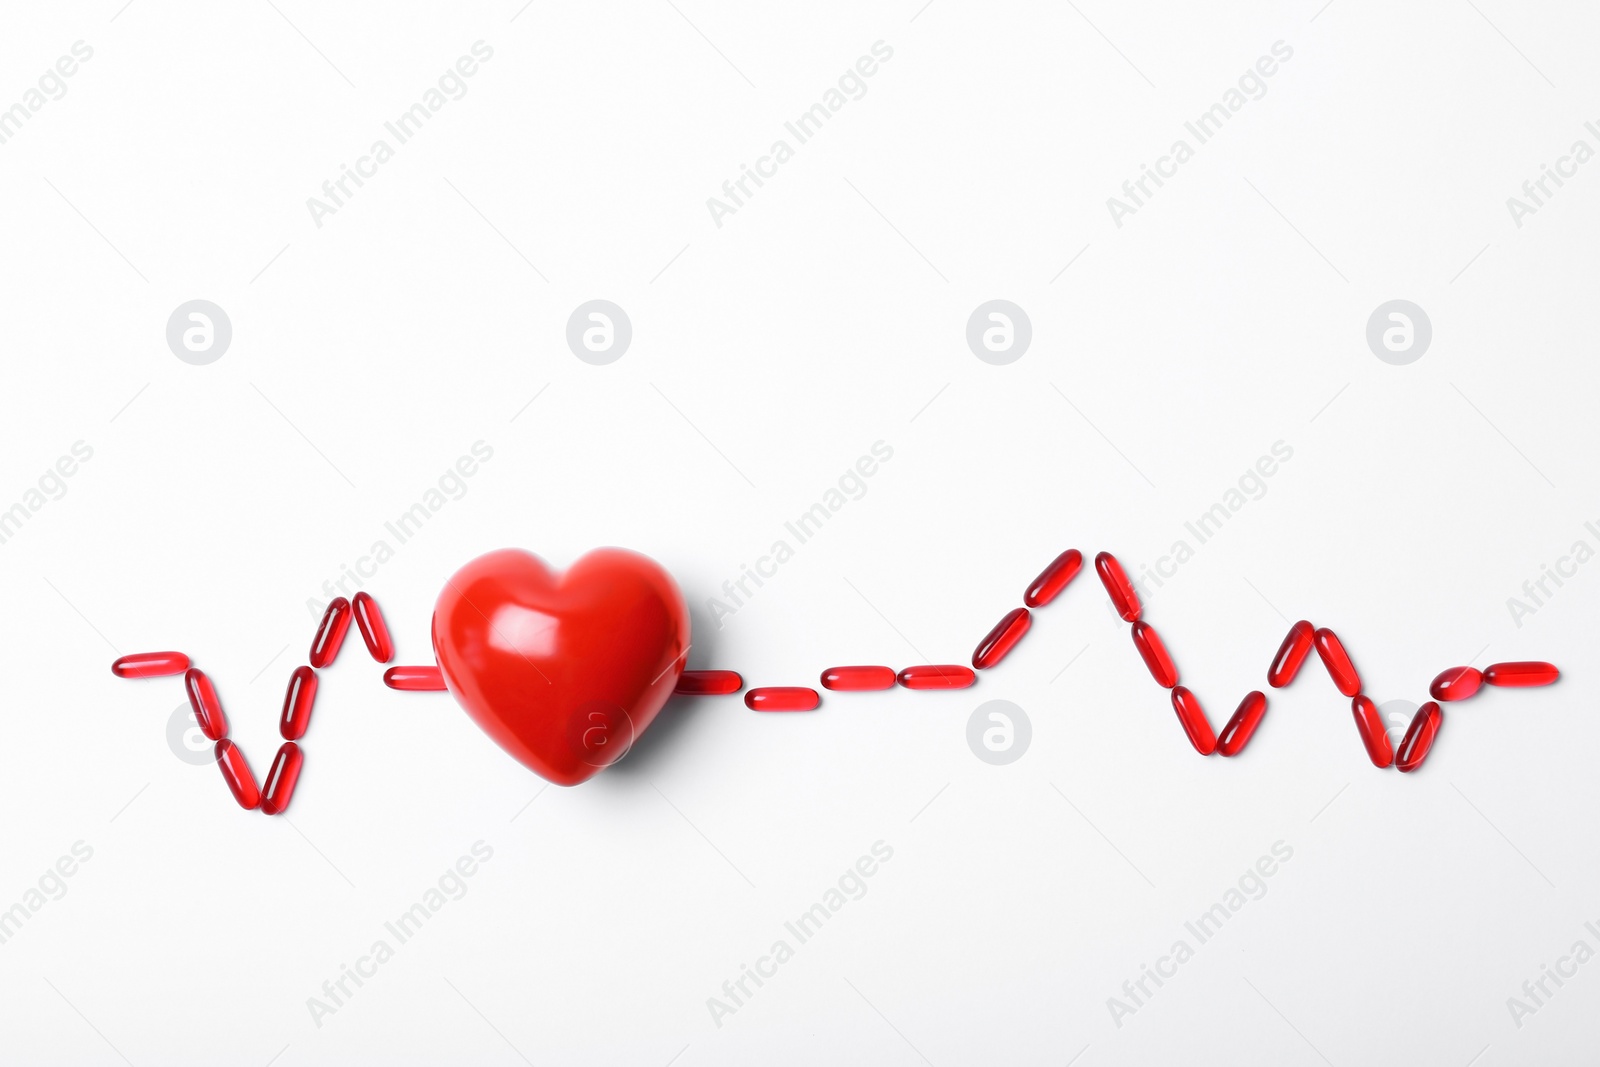 Photo of Red heart model and pills on white background. Cardiology service